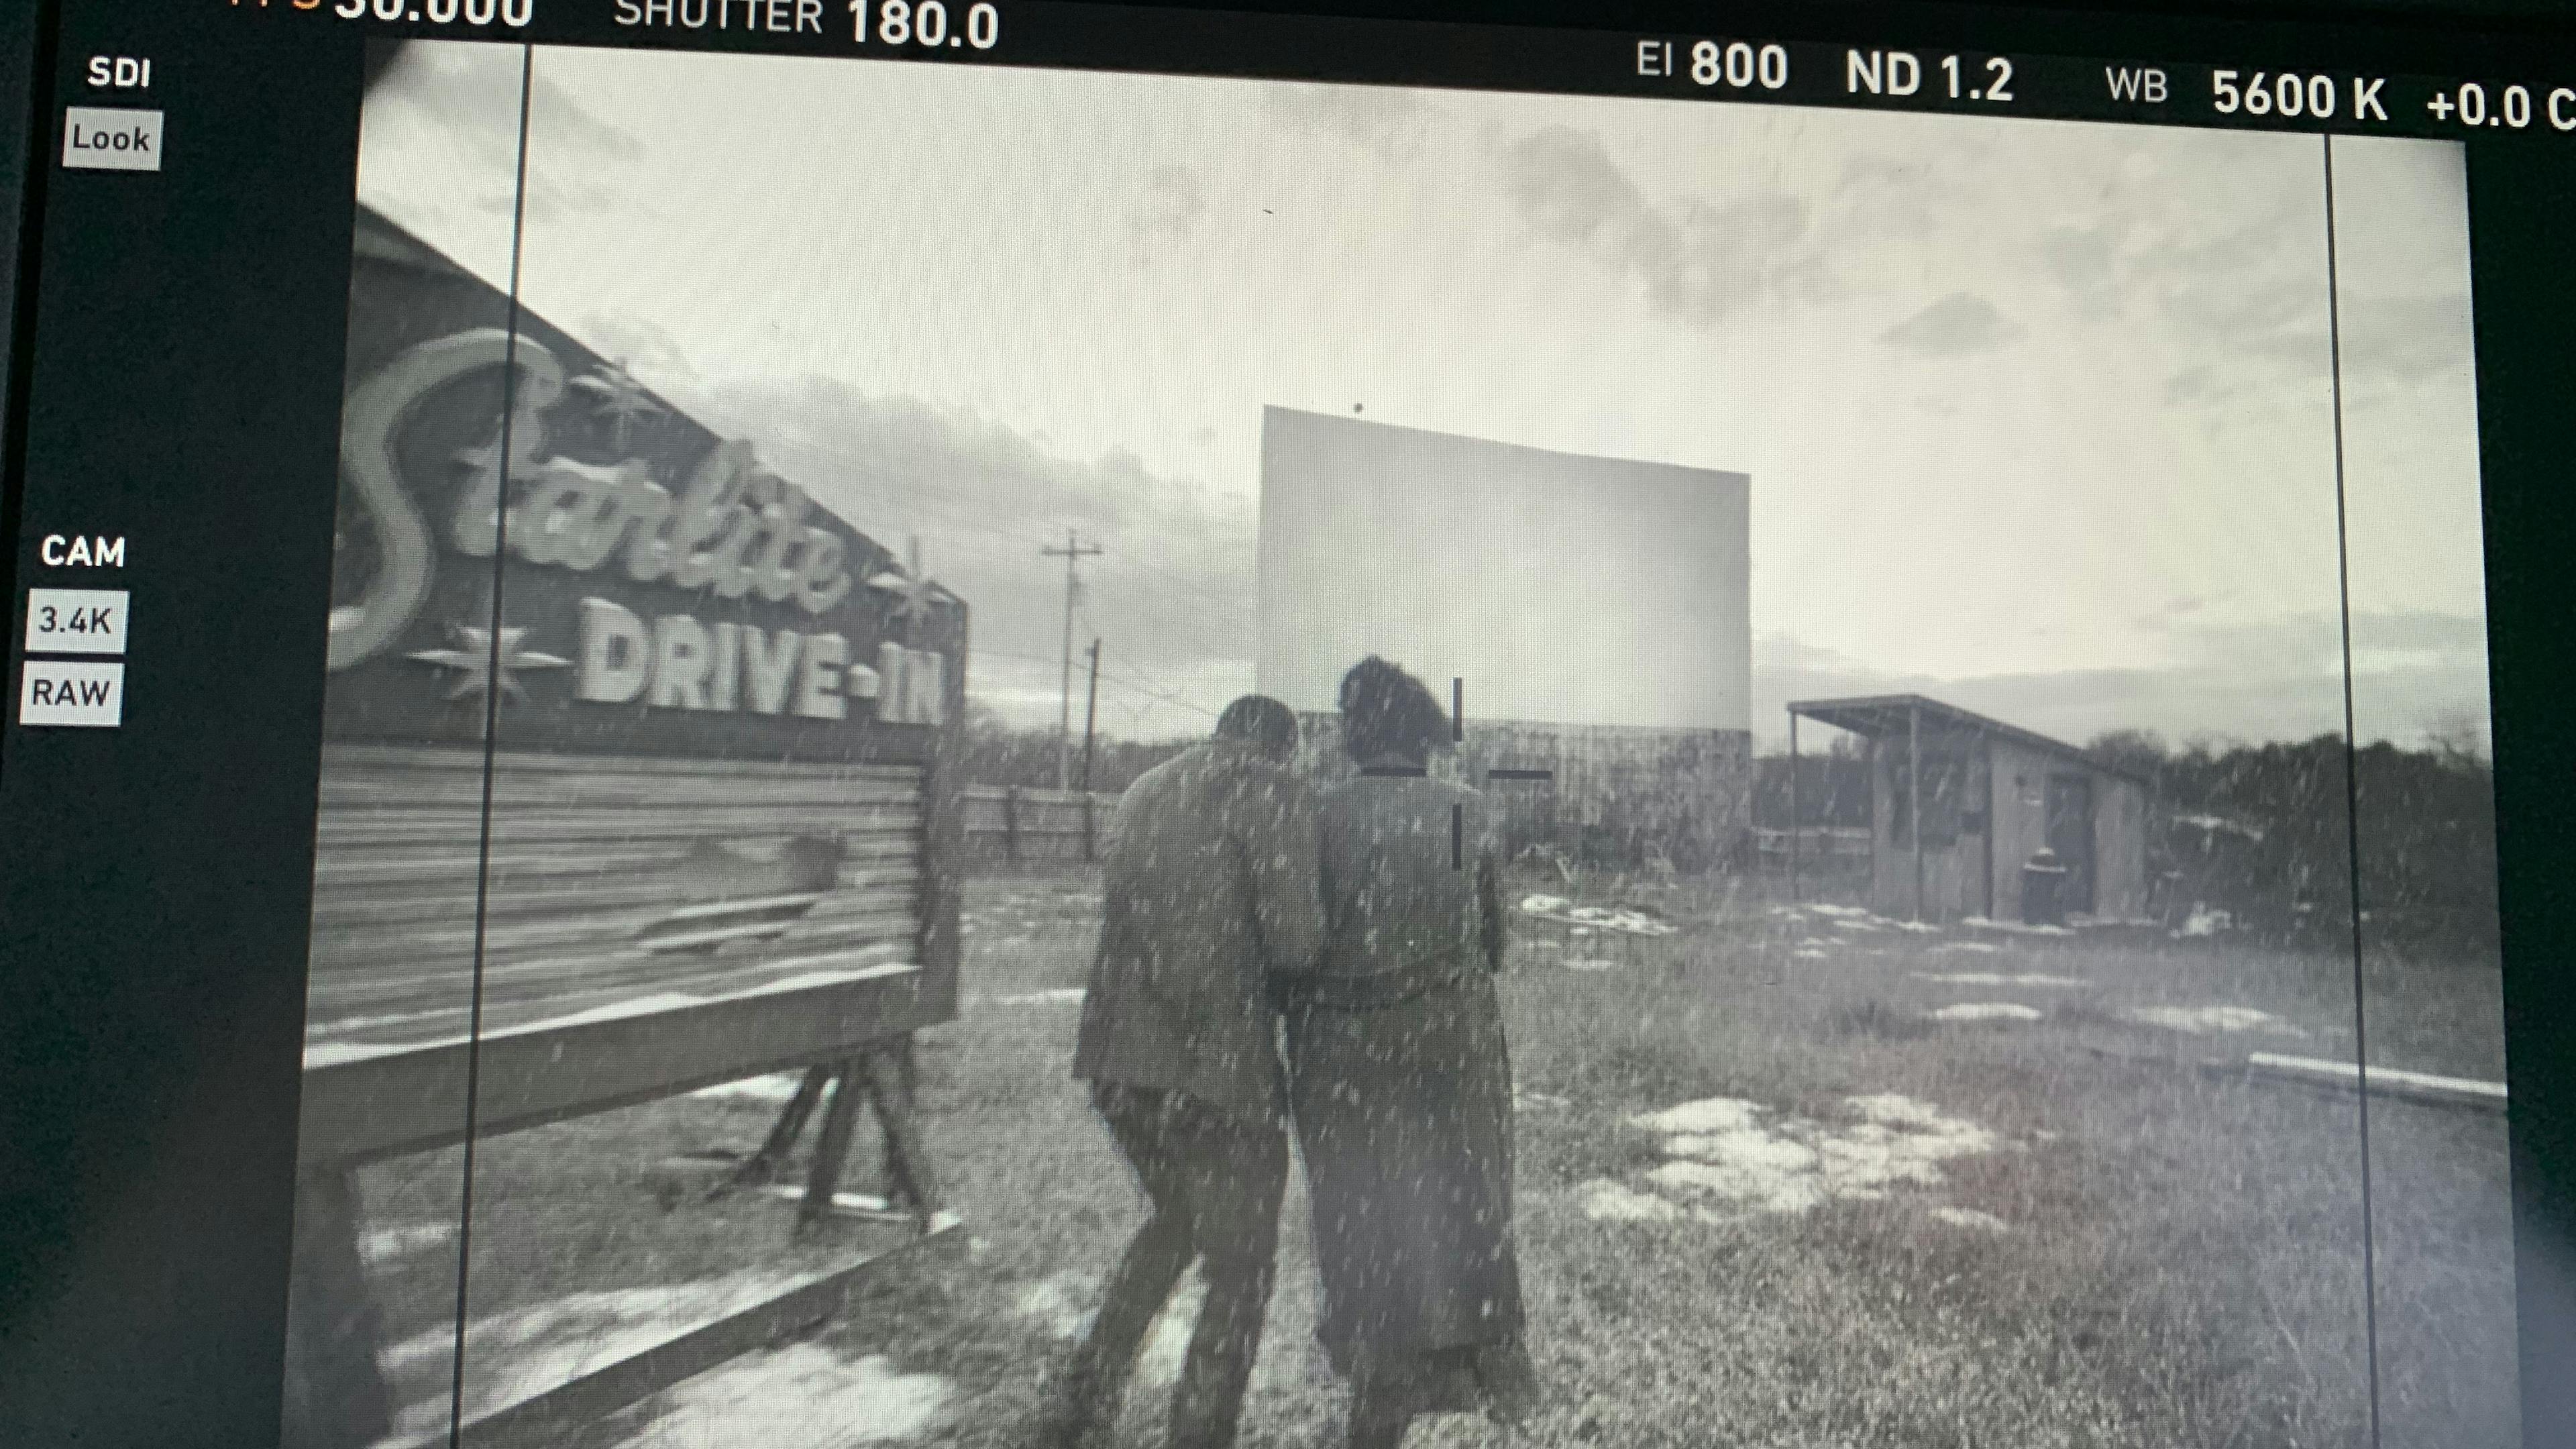 An image of a video camera screen showing two people walking into a drive-in movie theater